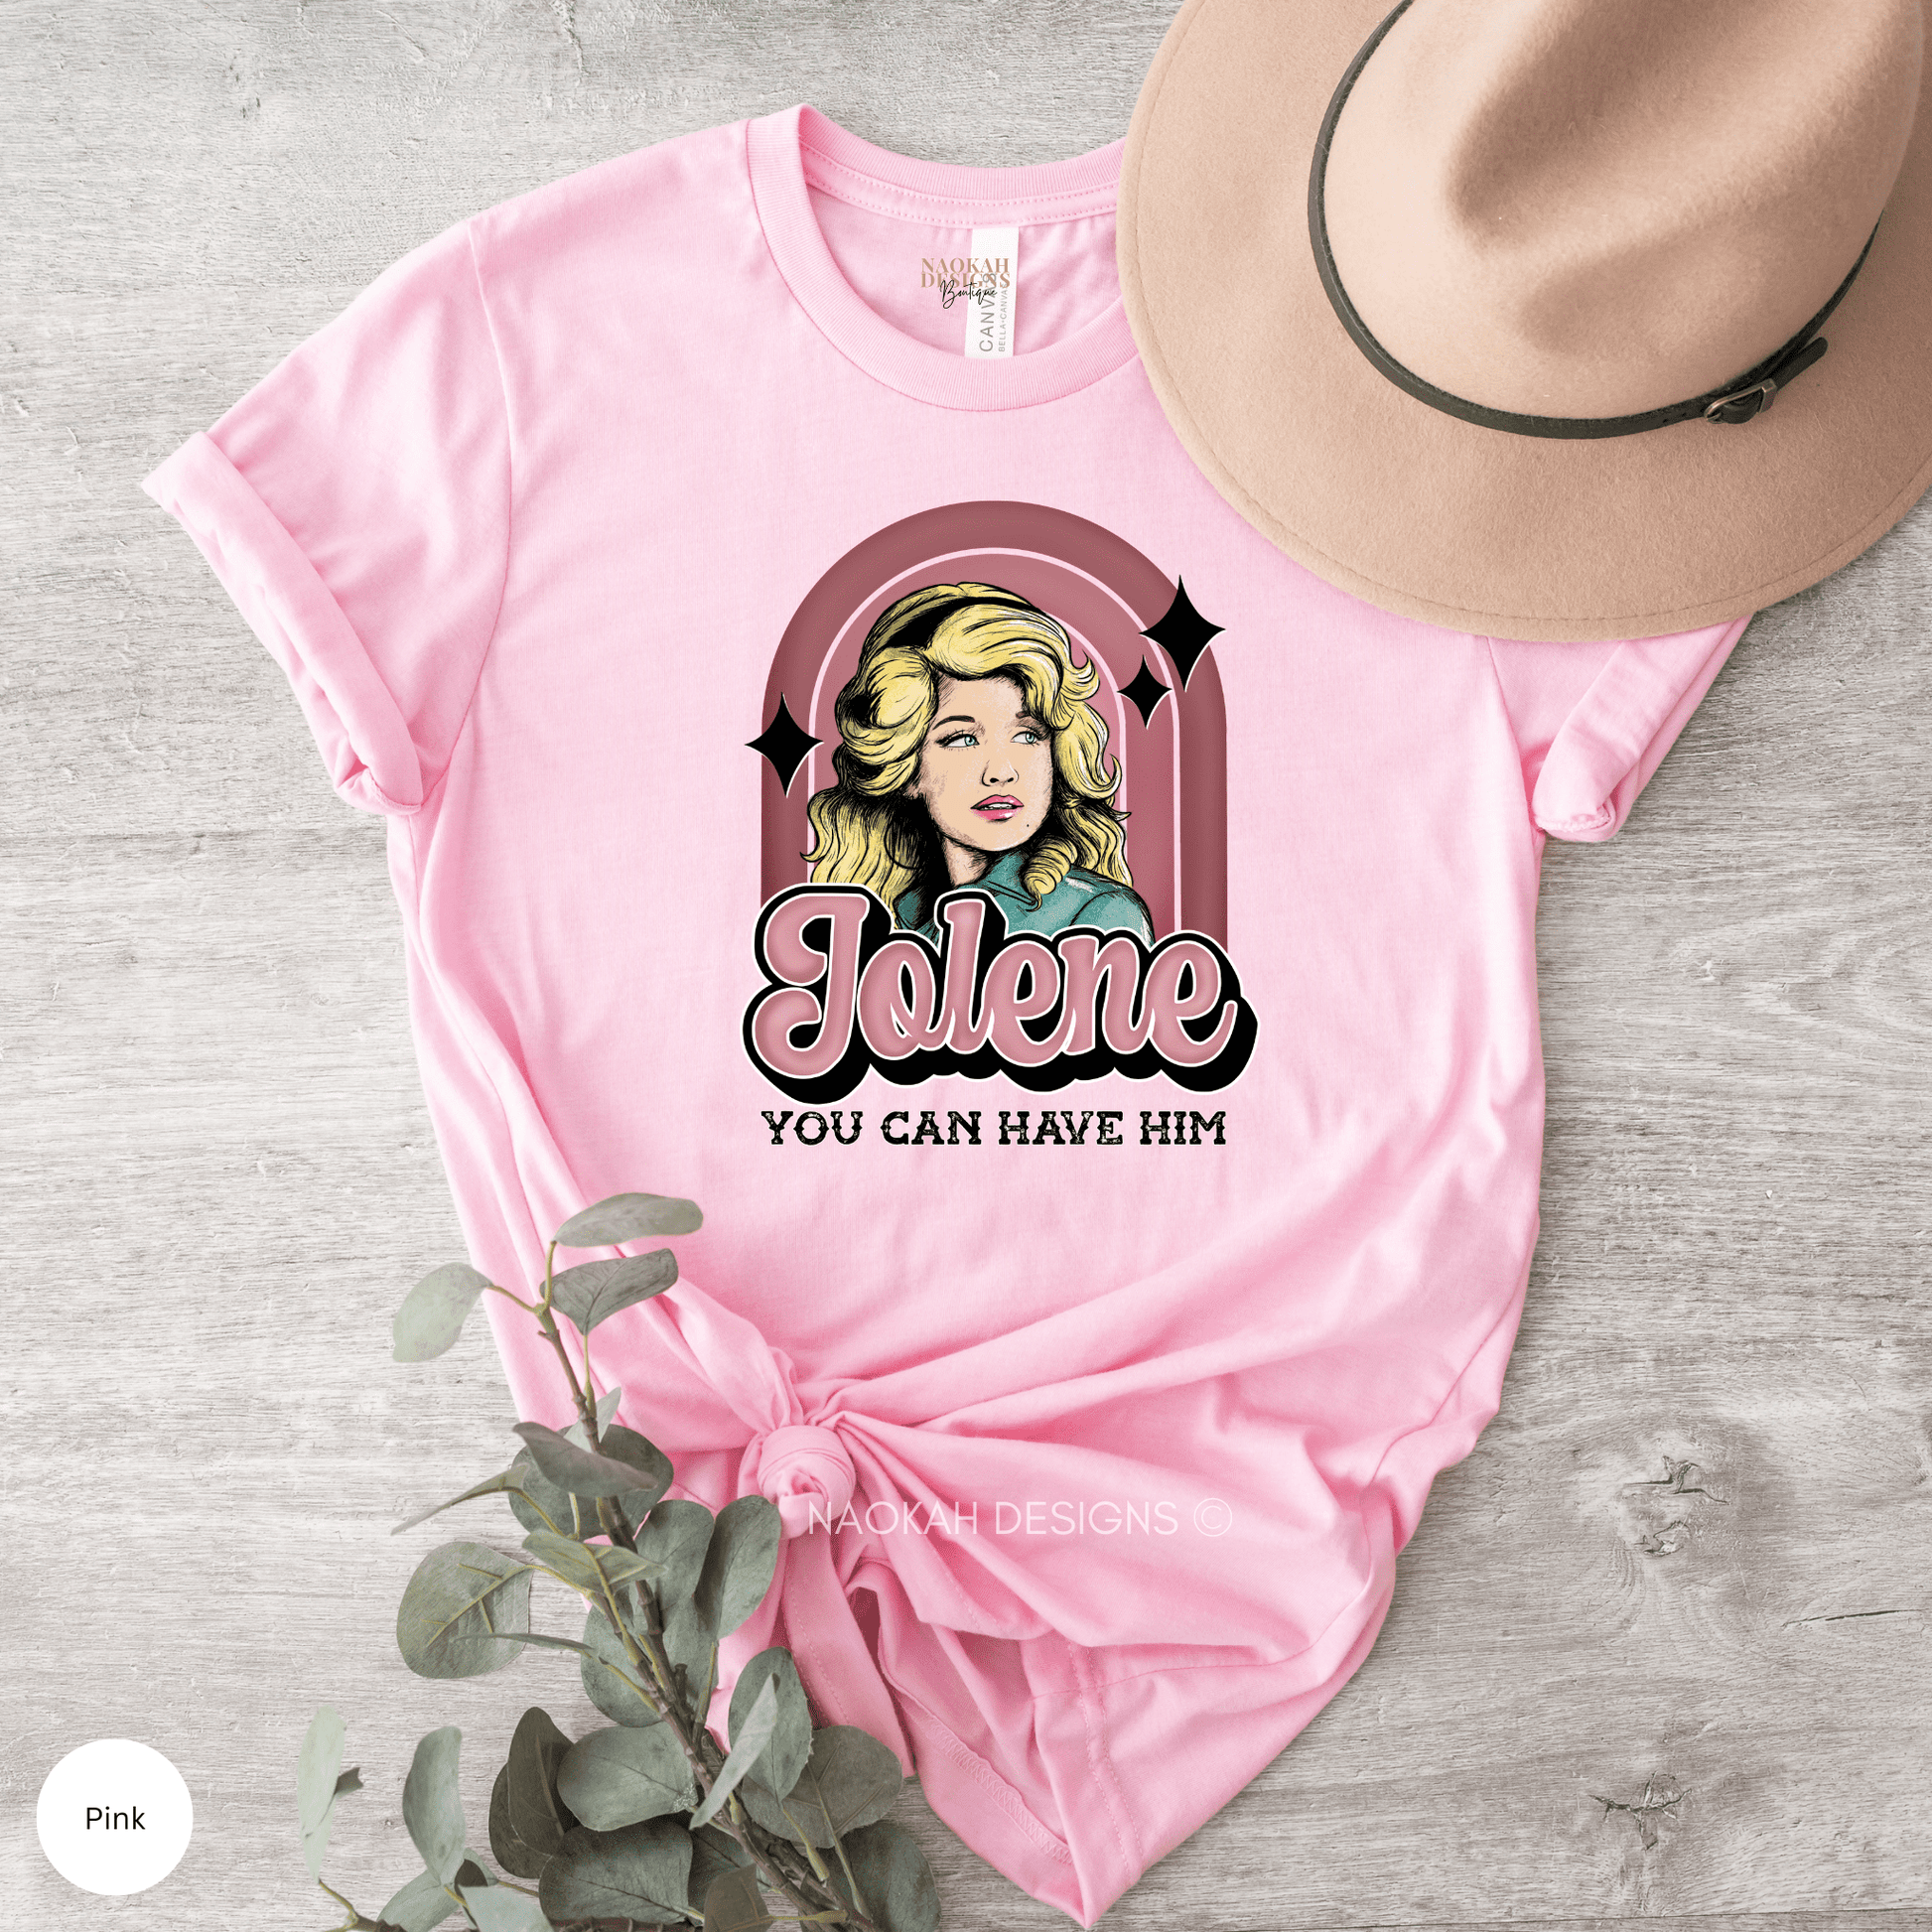 Jolene You Can Have Him T-Shirt, Cowgirl Shirt, Dolly Parton Tee, Cowgirl Graphic Tee, Western T-Shirt, Western Graphic Tee, Jolene T-shirt